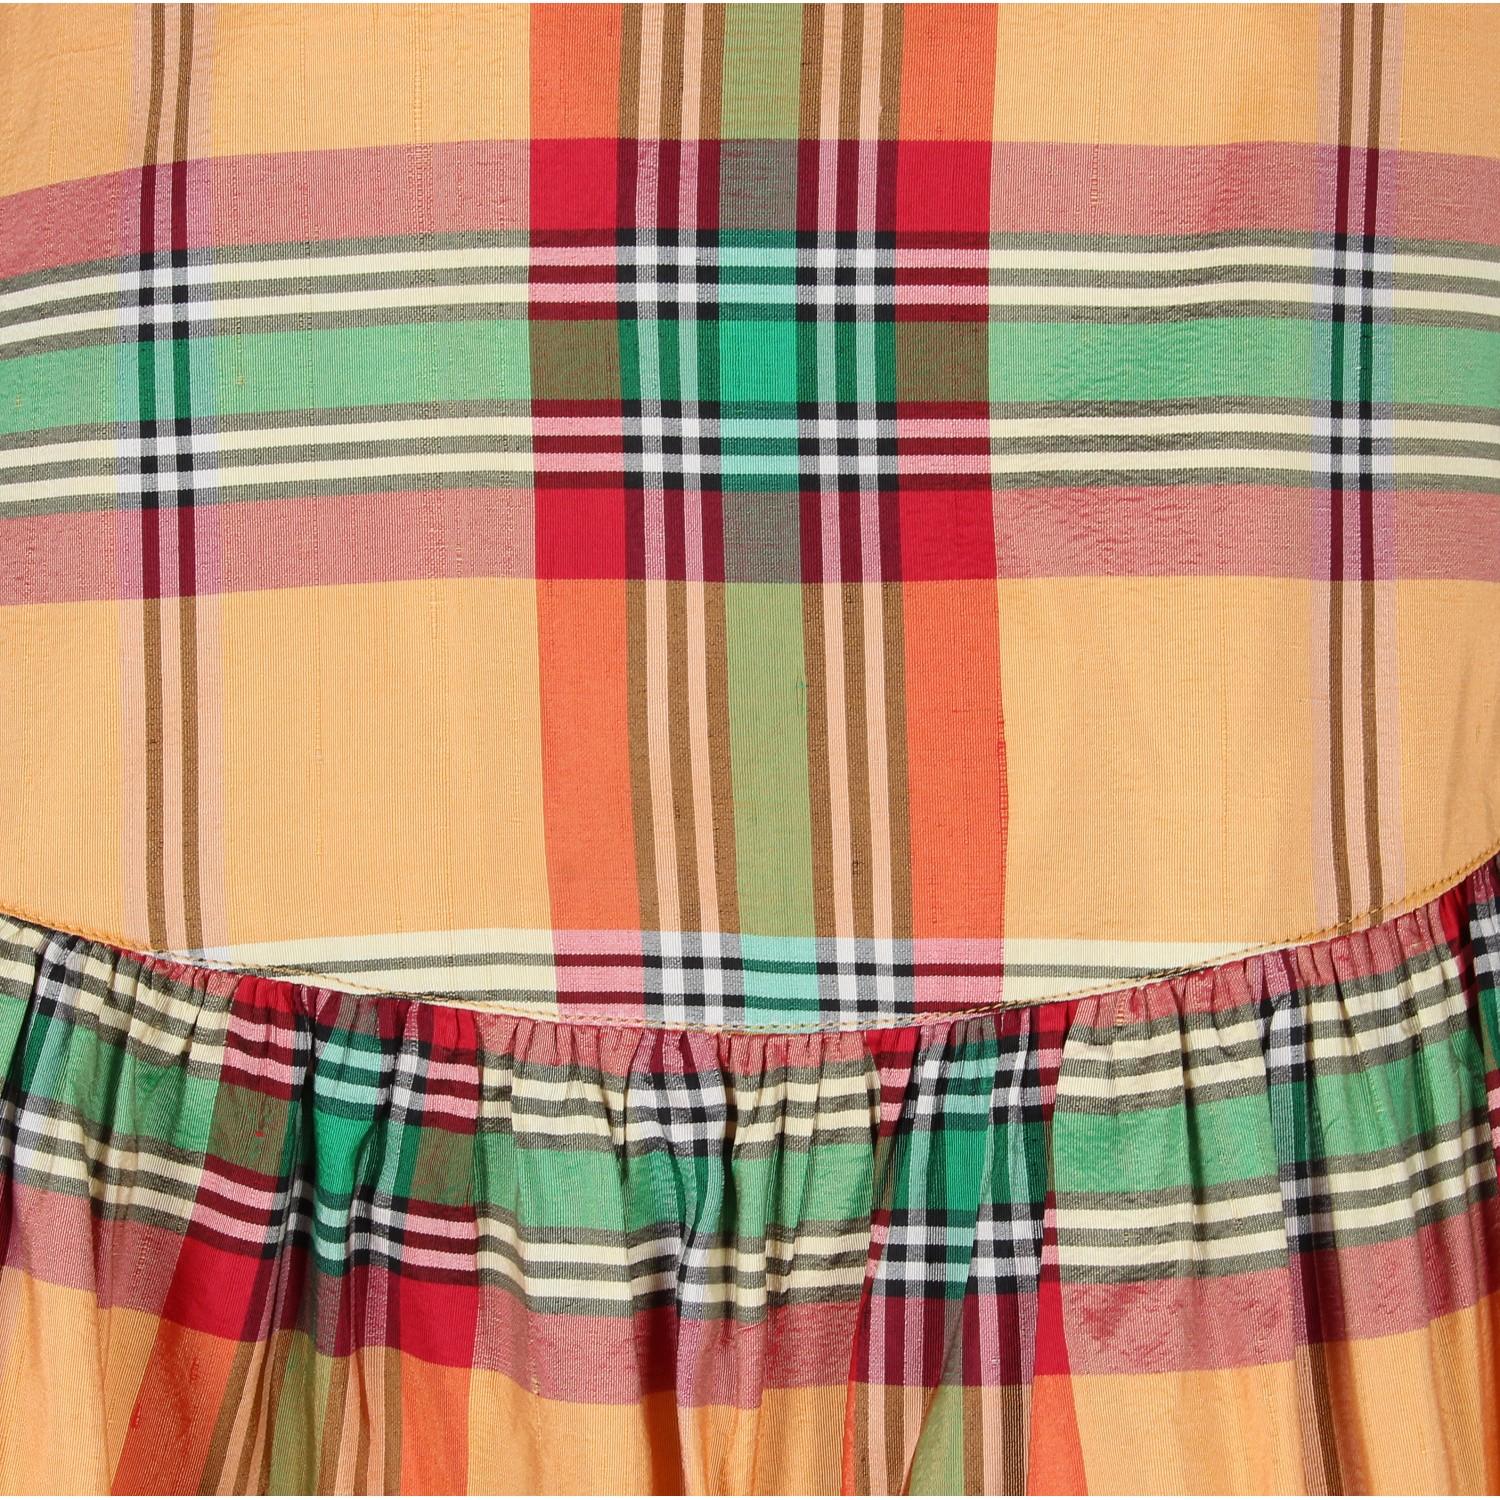 Kenzo orange, green, white and red tartan shantung silk skirt. It has two frills and one decorative bow on the back. The item is vintage, it was produced in the 1990s and is in very good conditions but it shows one little mend on waist lining, as in